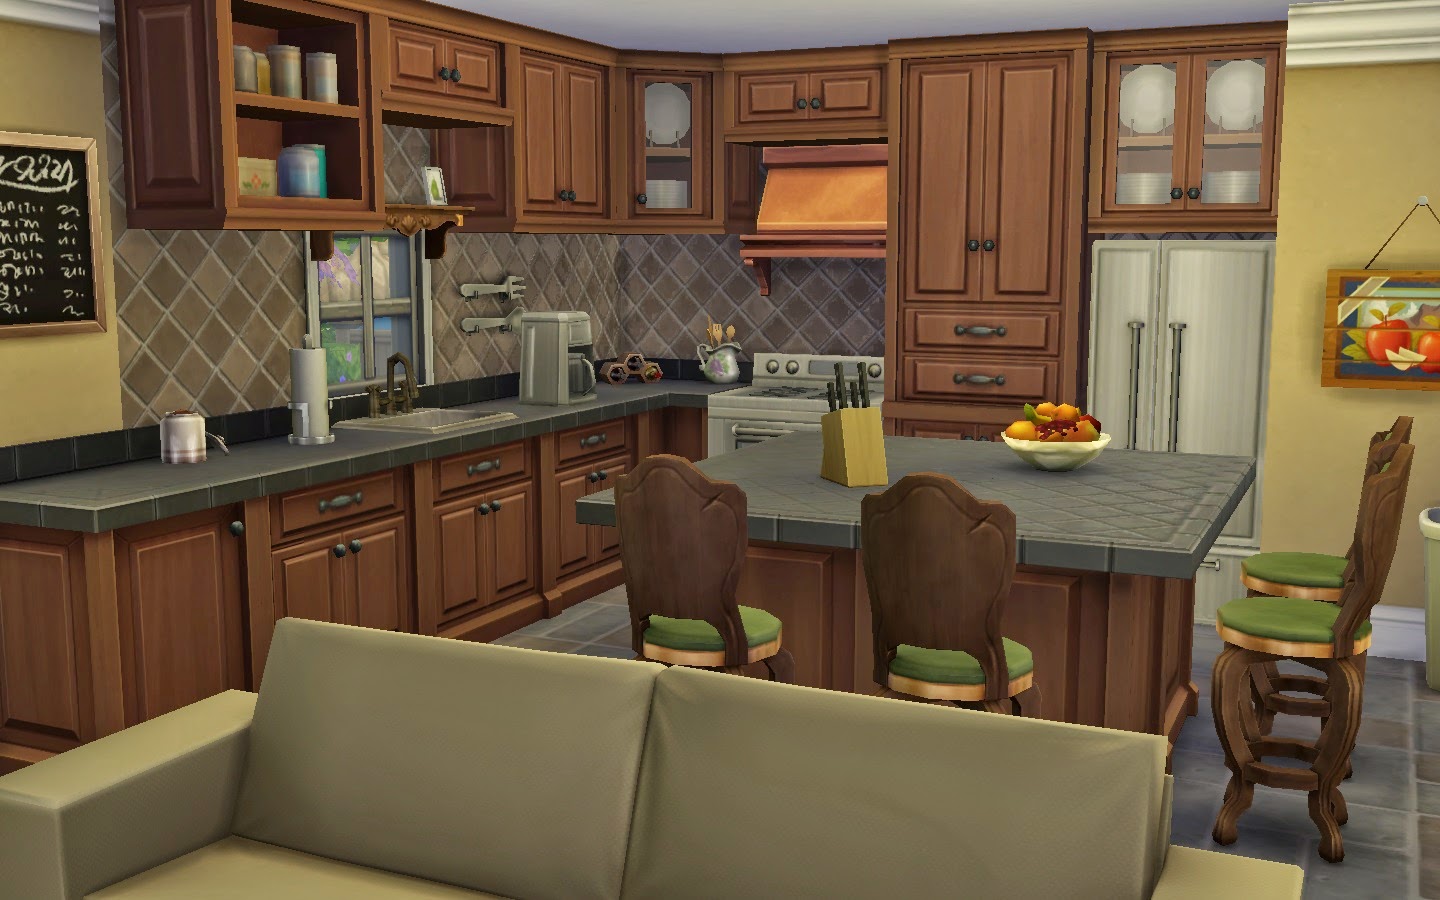 Mod The Sims Looking for sims 4 kitchen conversion for TS3